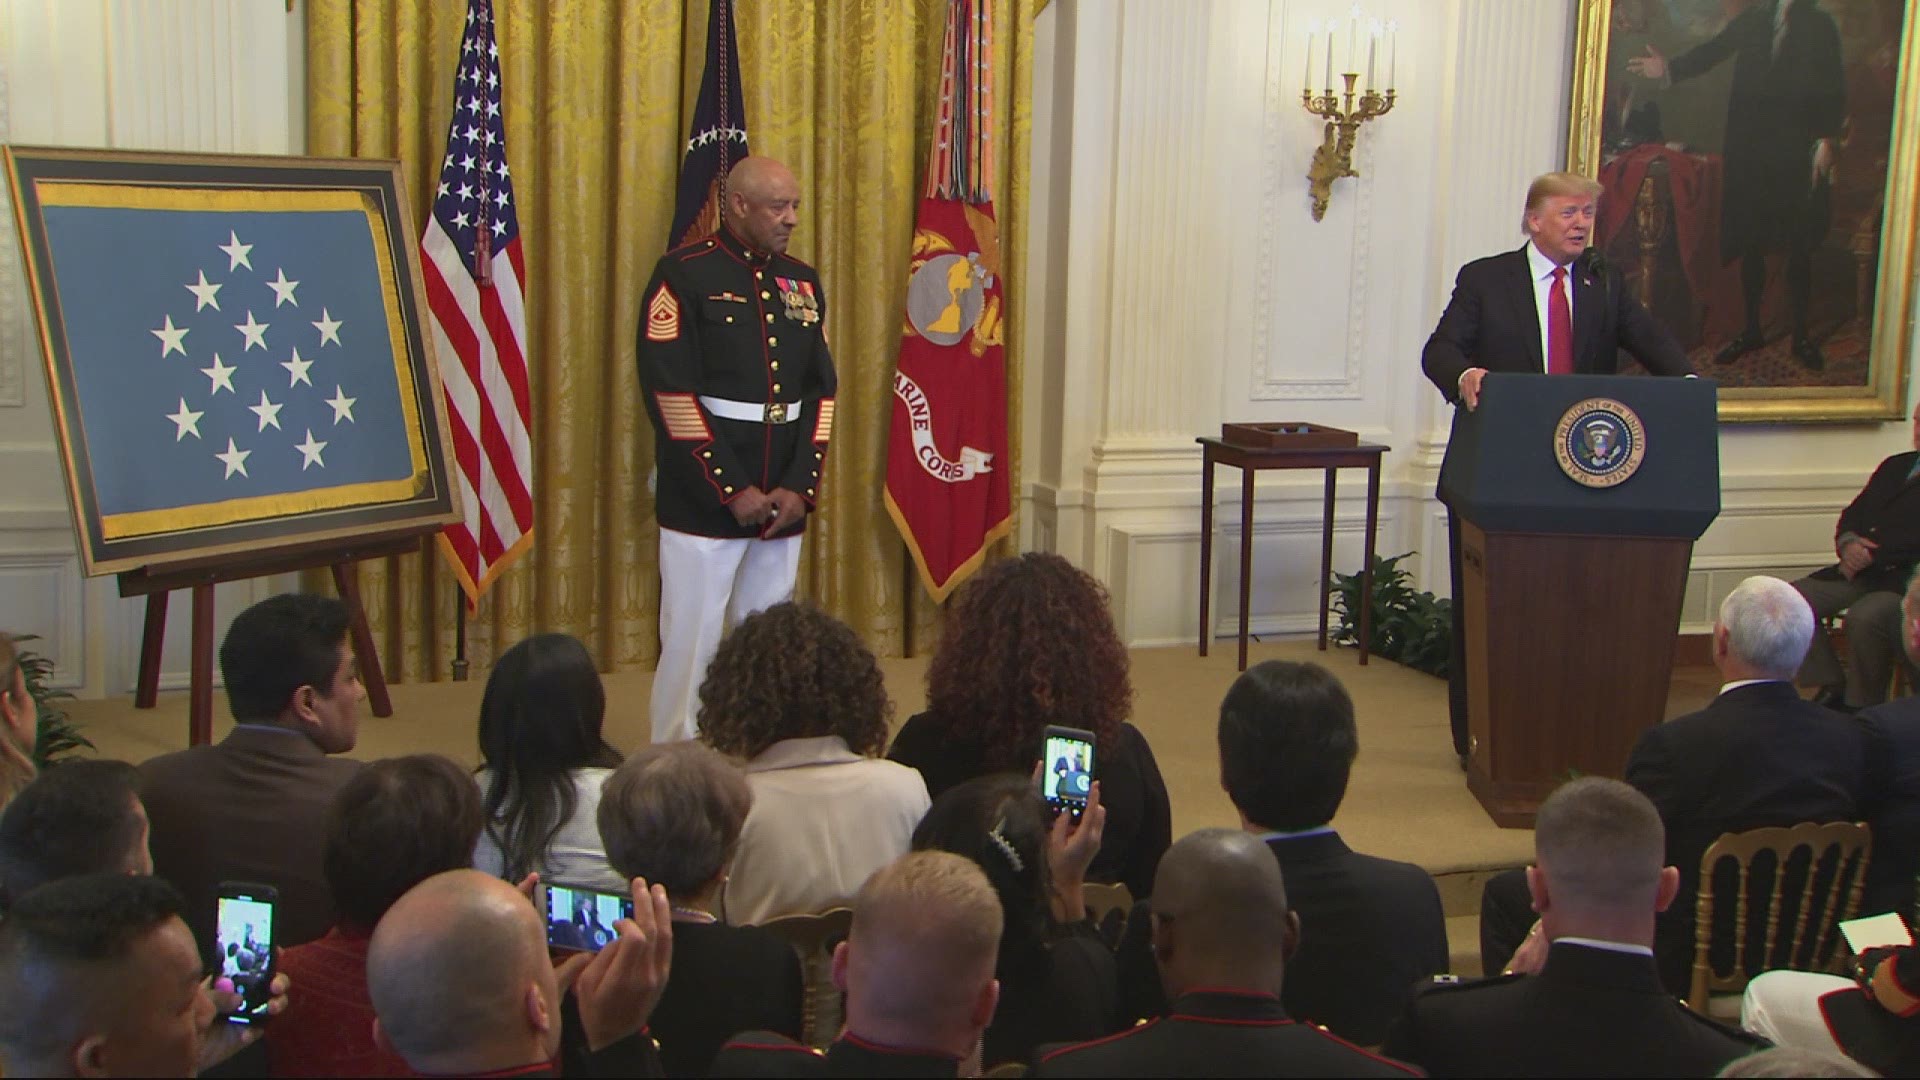 President Donald Trump on Wednesday presented the nation's highest military honor to an 80-year-old retired Marine sergeant major for valorous action in Vietnam five decades ago. (AP)